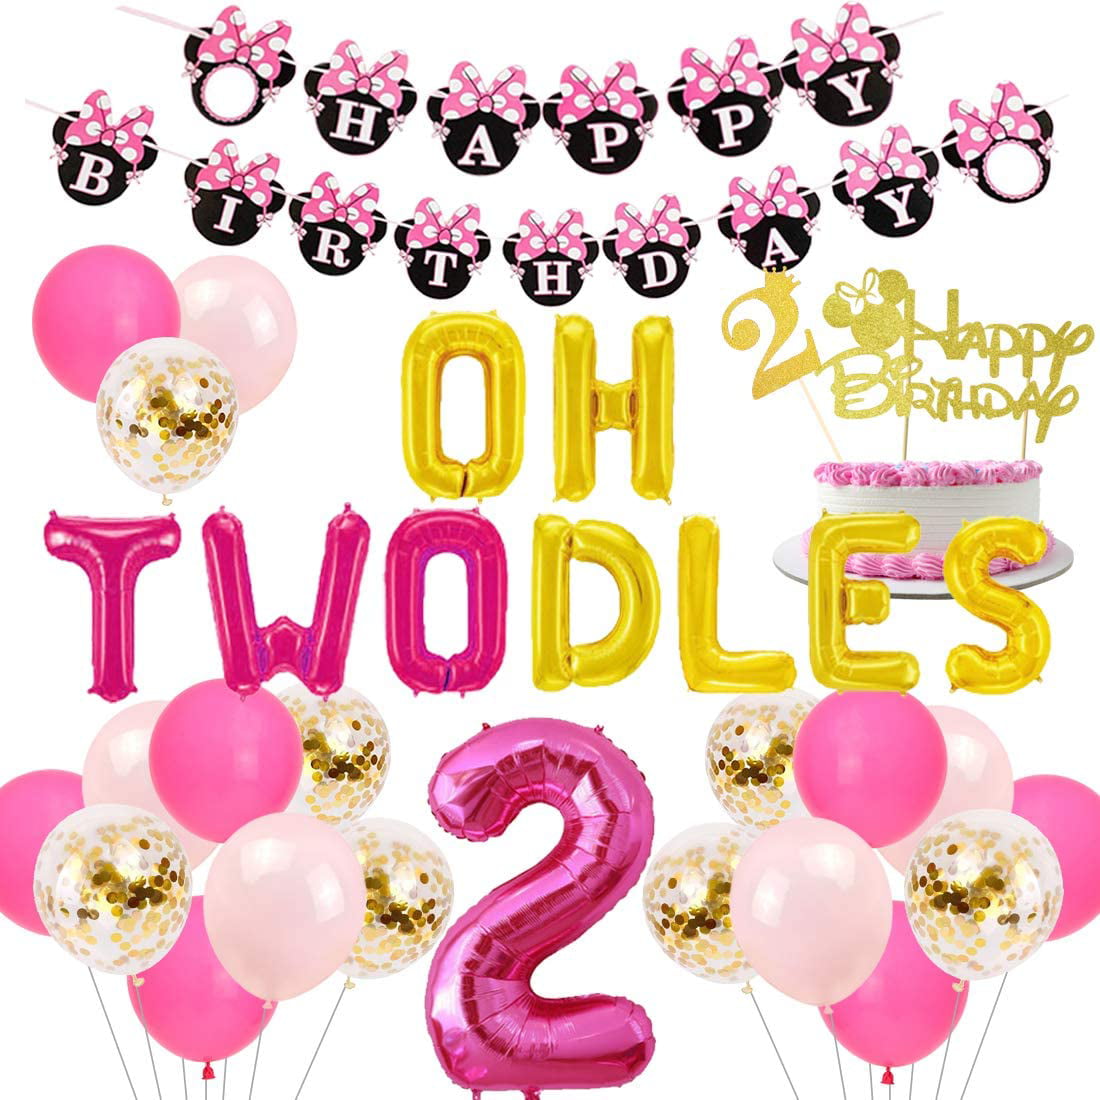 Baby & Details about   Oh Twodles Banner Boy Girl 2nd Anniversary Birthday Party Decorations 